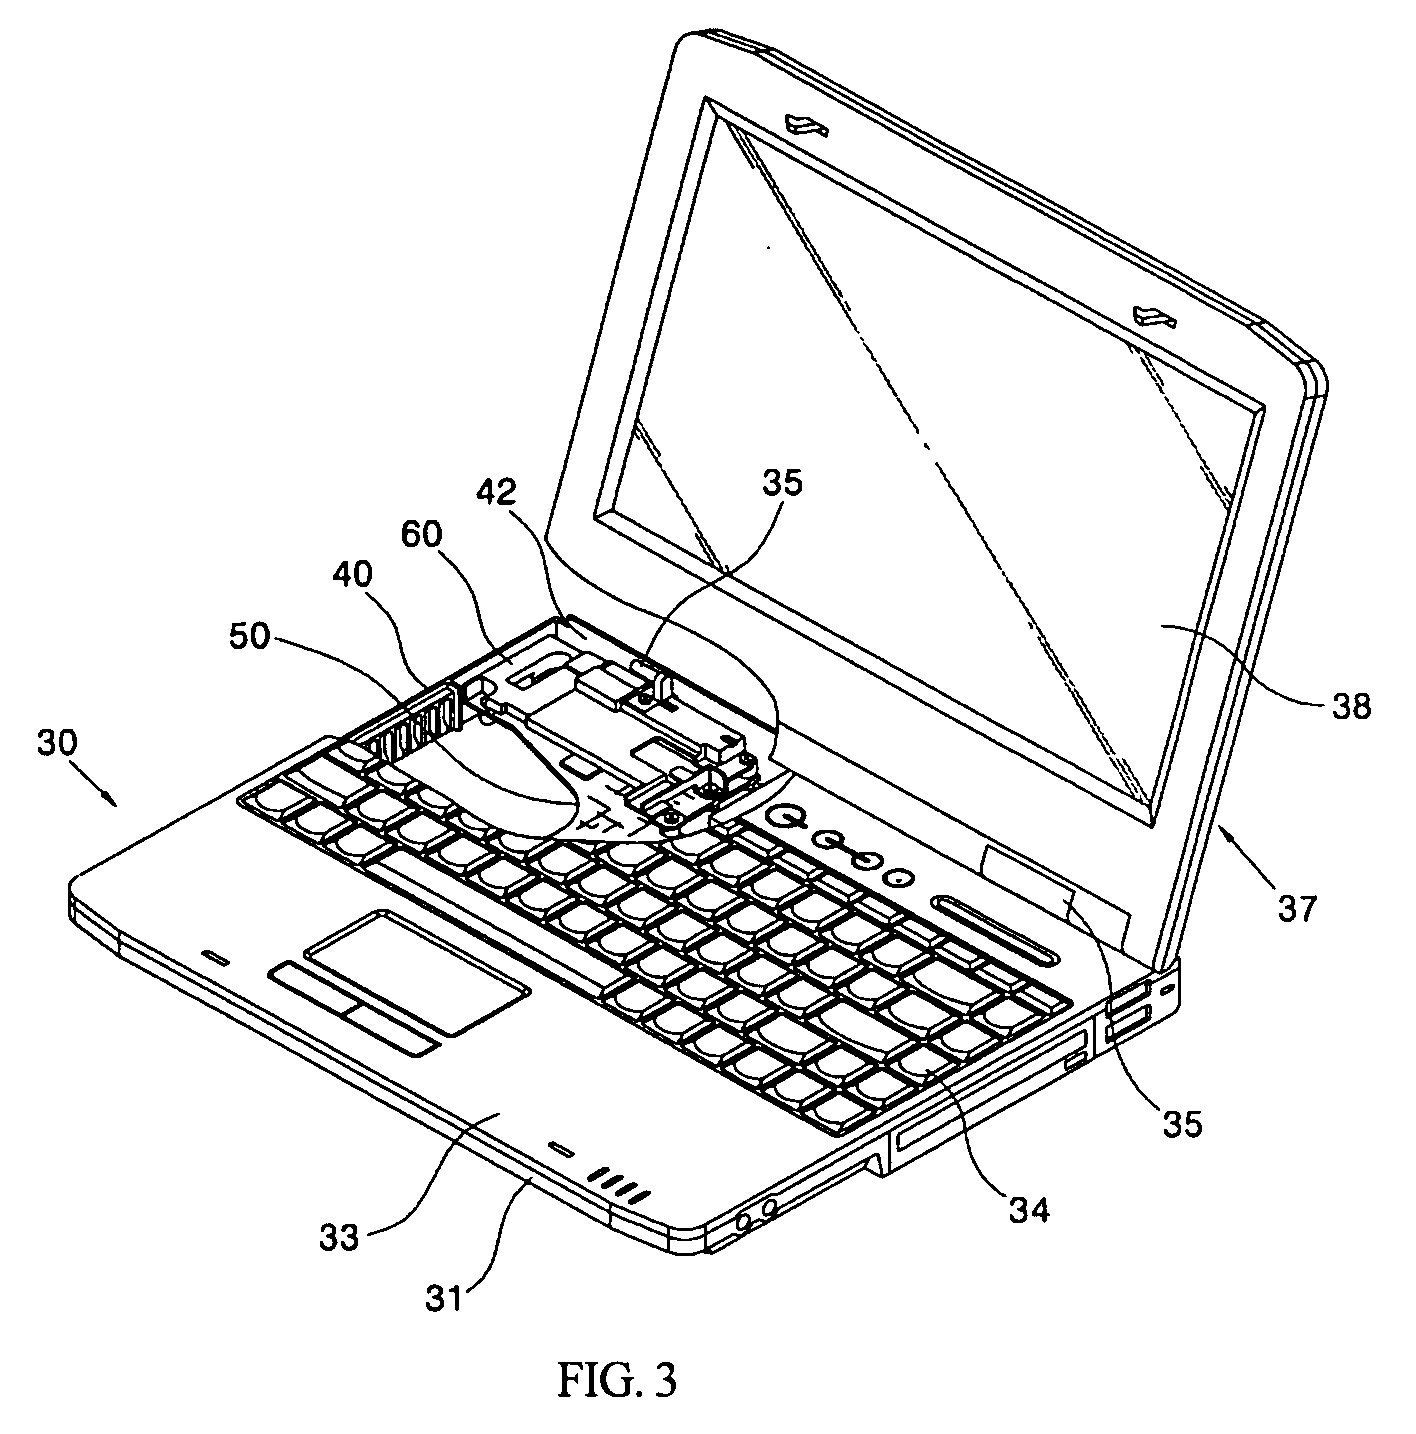 Hinge frame for portable computer and structure for mounting the same